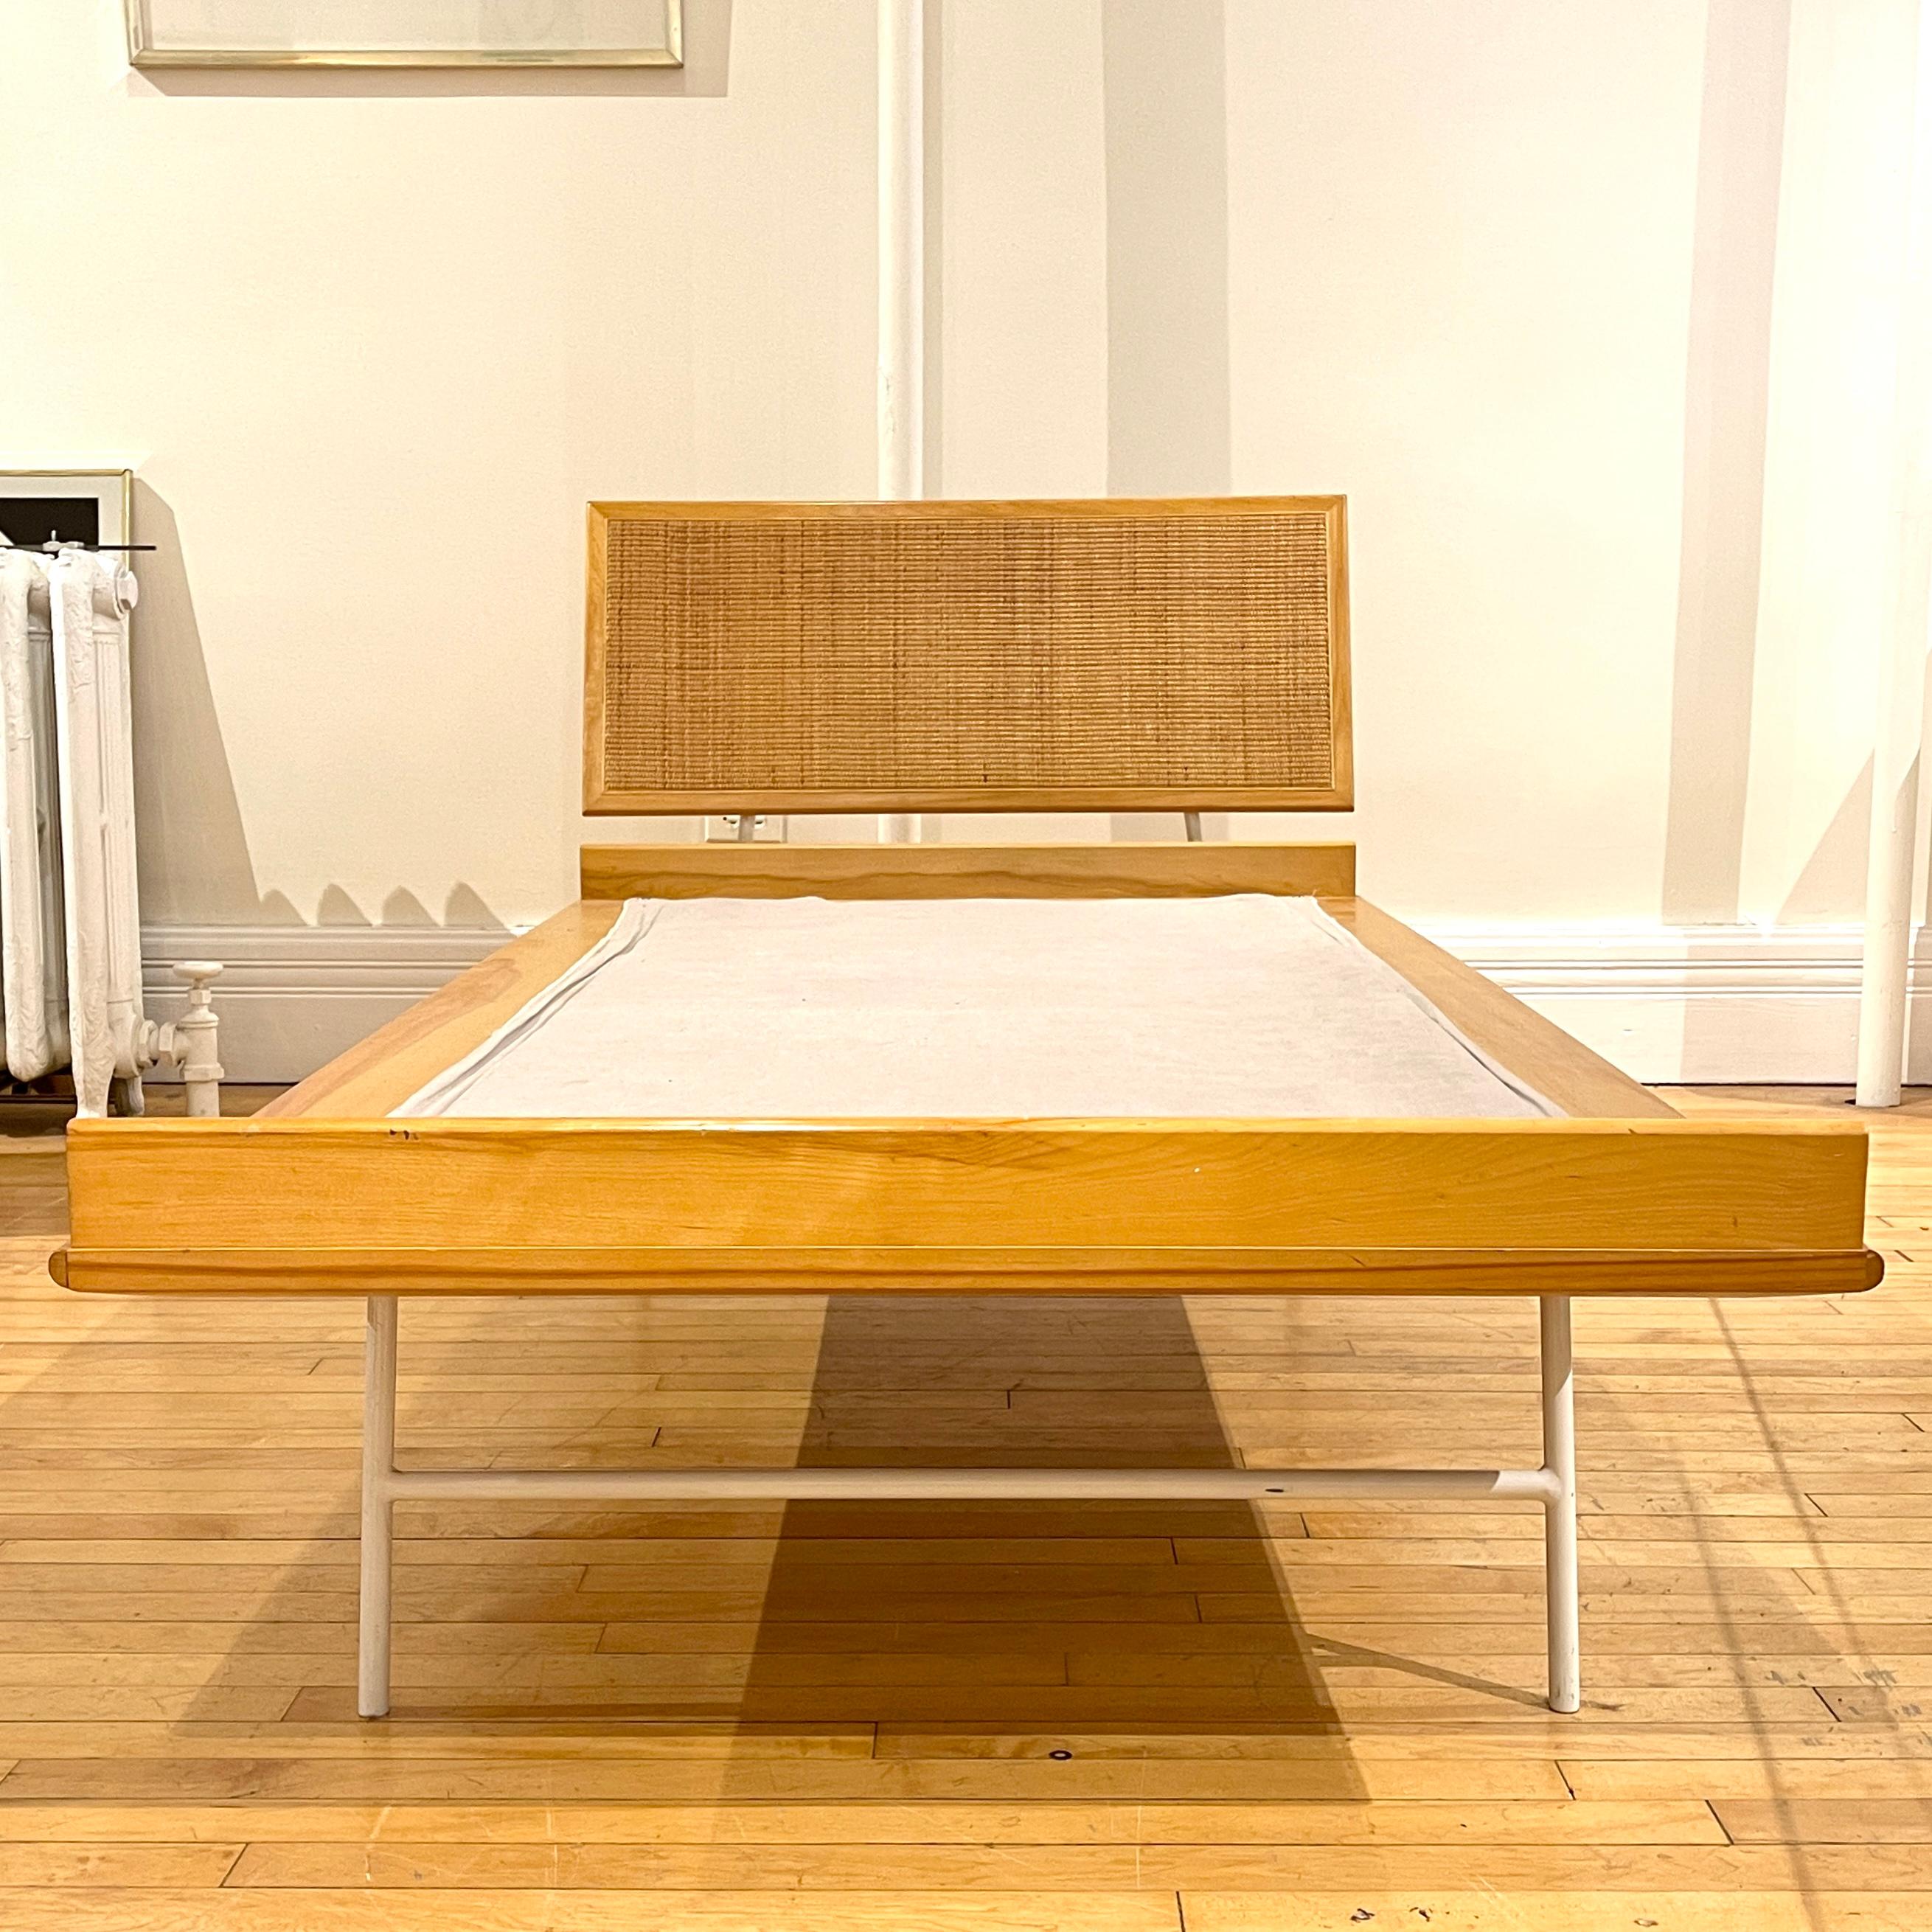 Rare and special very early (1959) George Nelson thin edge daybed sold by Herman Miller. Near excellent condition given age.